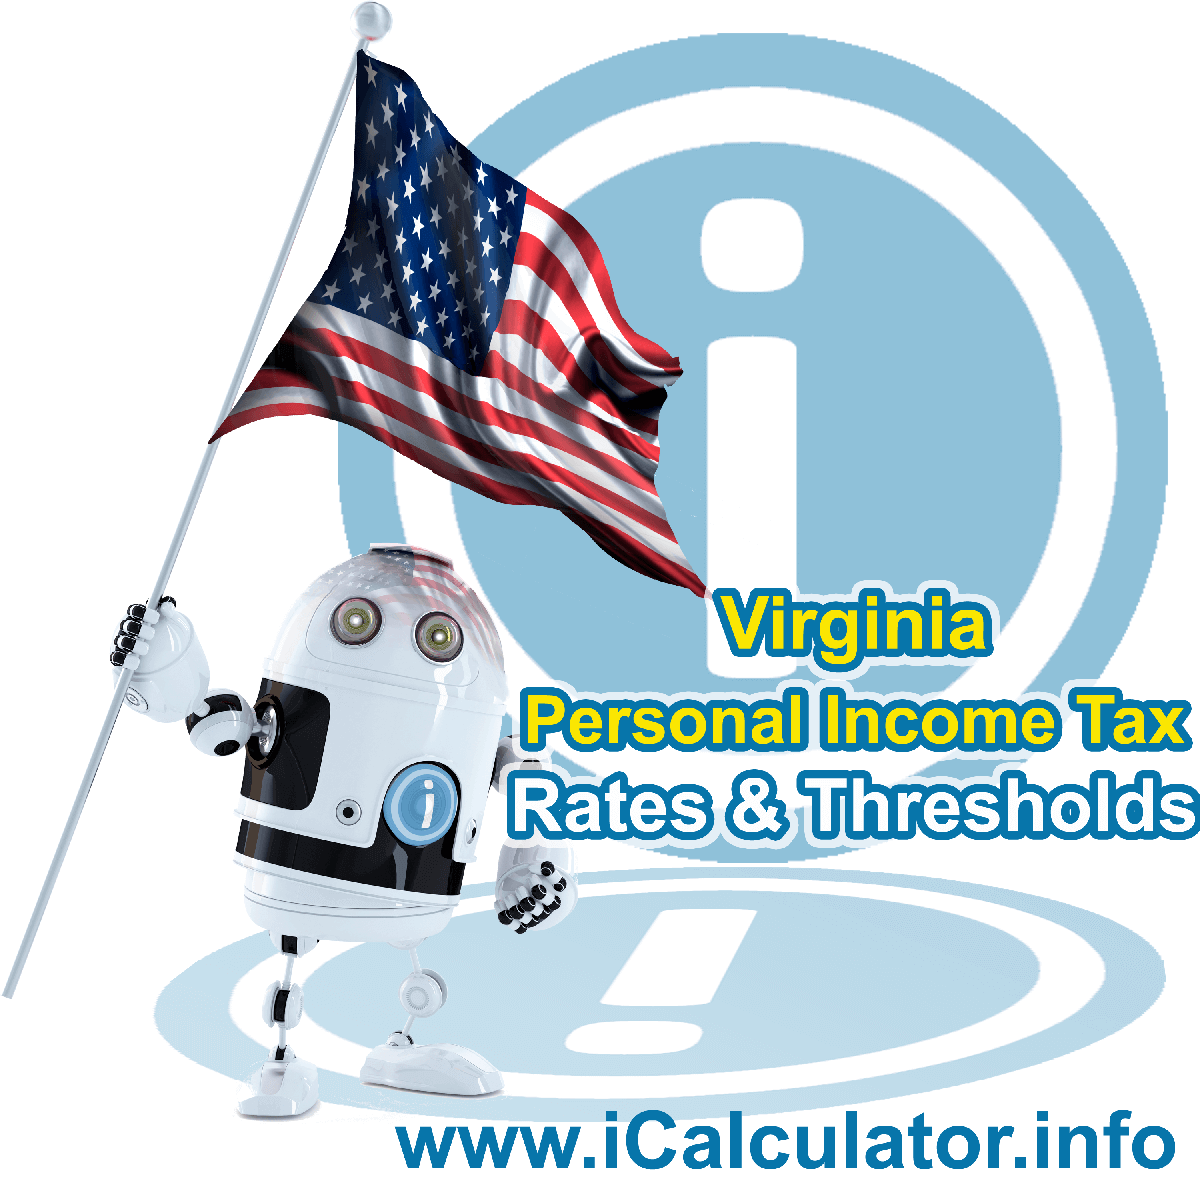 Virginia State Tax Tables 2014. This image displays details of the Virginia State Tax Tables for the 2014 tax return year which is provided in support of the 2014 US Tax Calculator